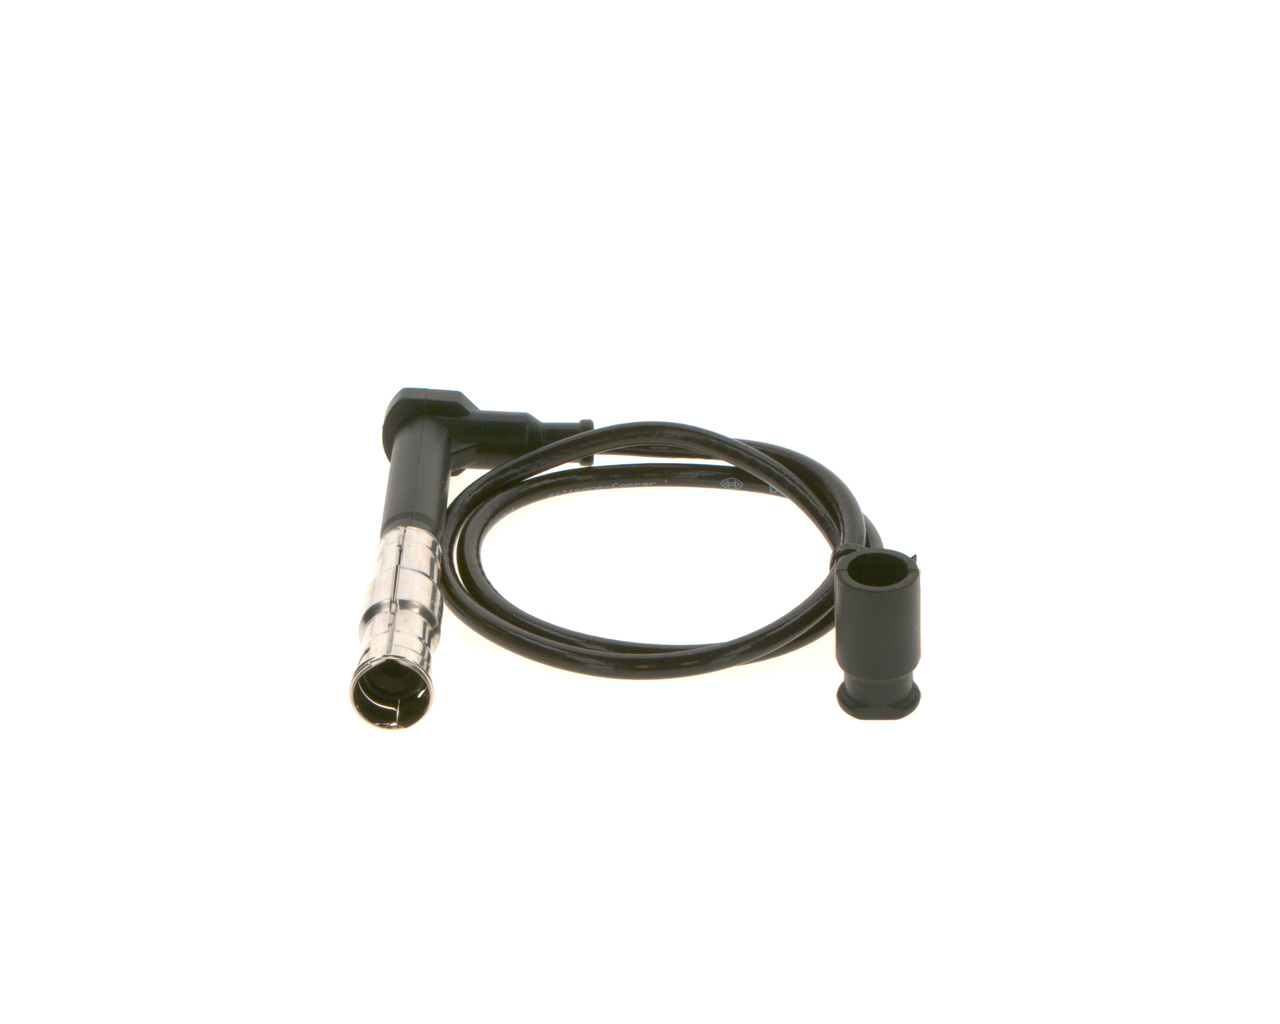 0986356315, Ignition Cable Kit, BOSCH, 265, 9509, B315, ZEF635, 0300890635, 9515